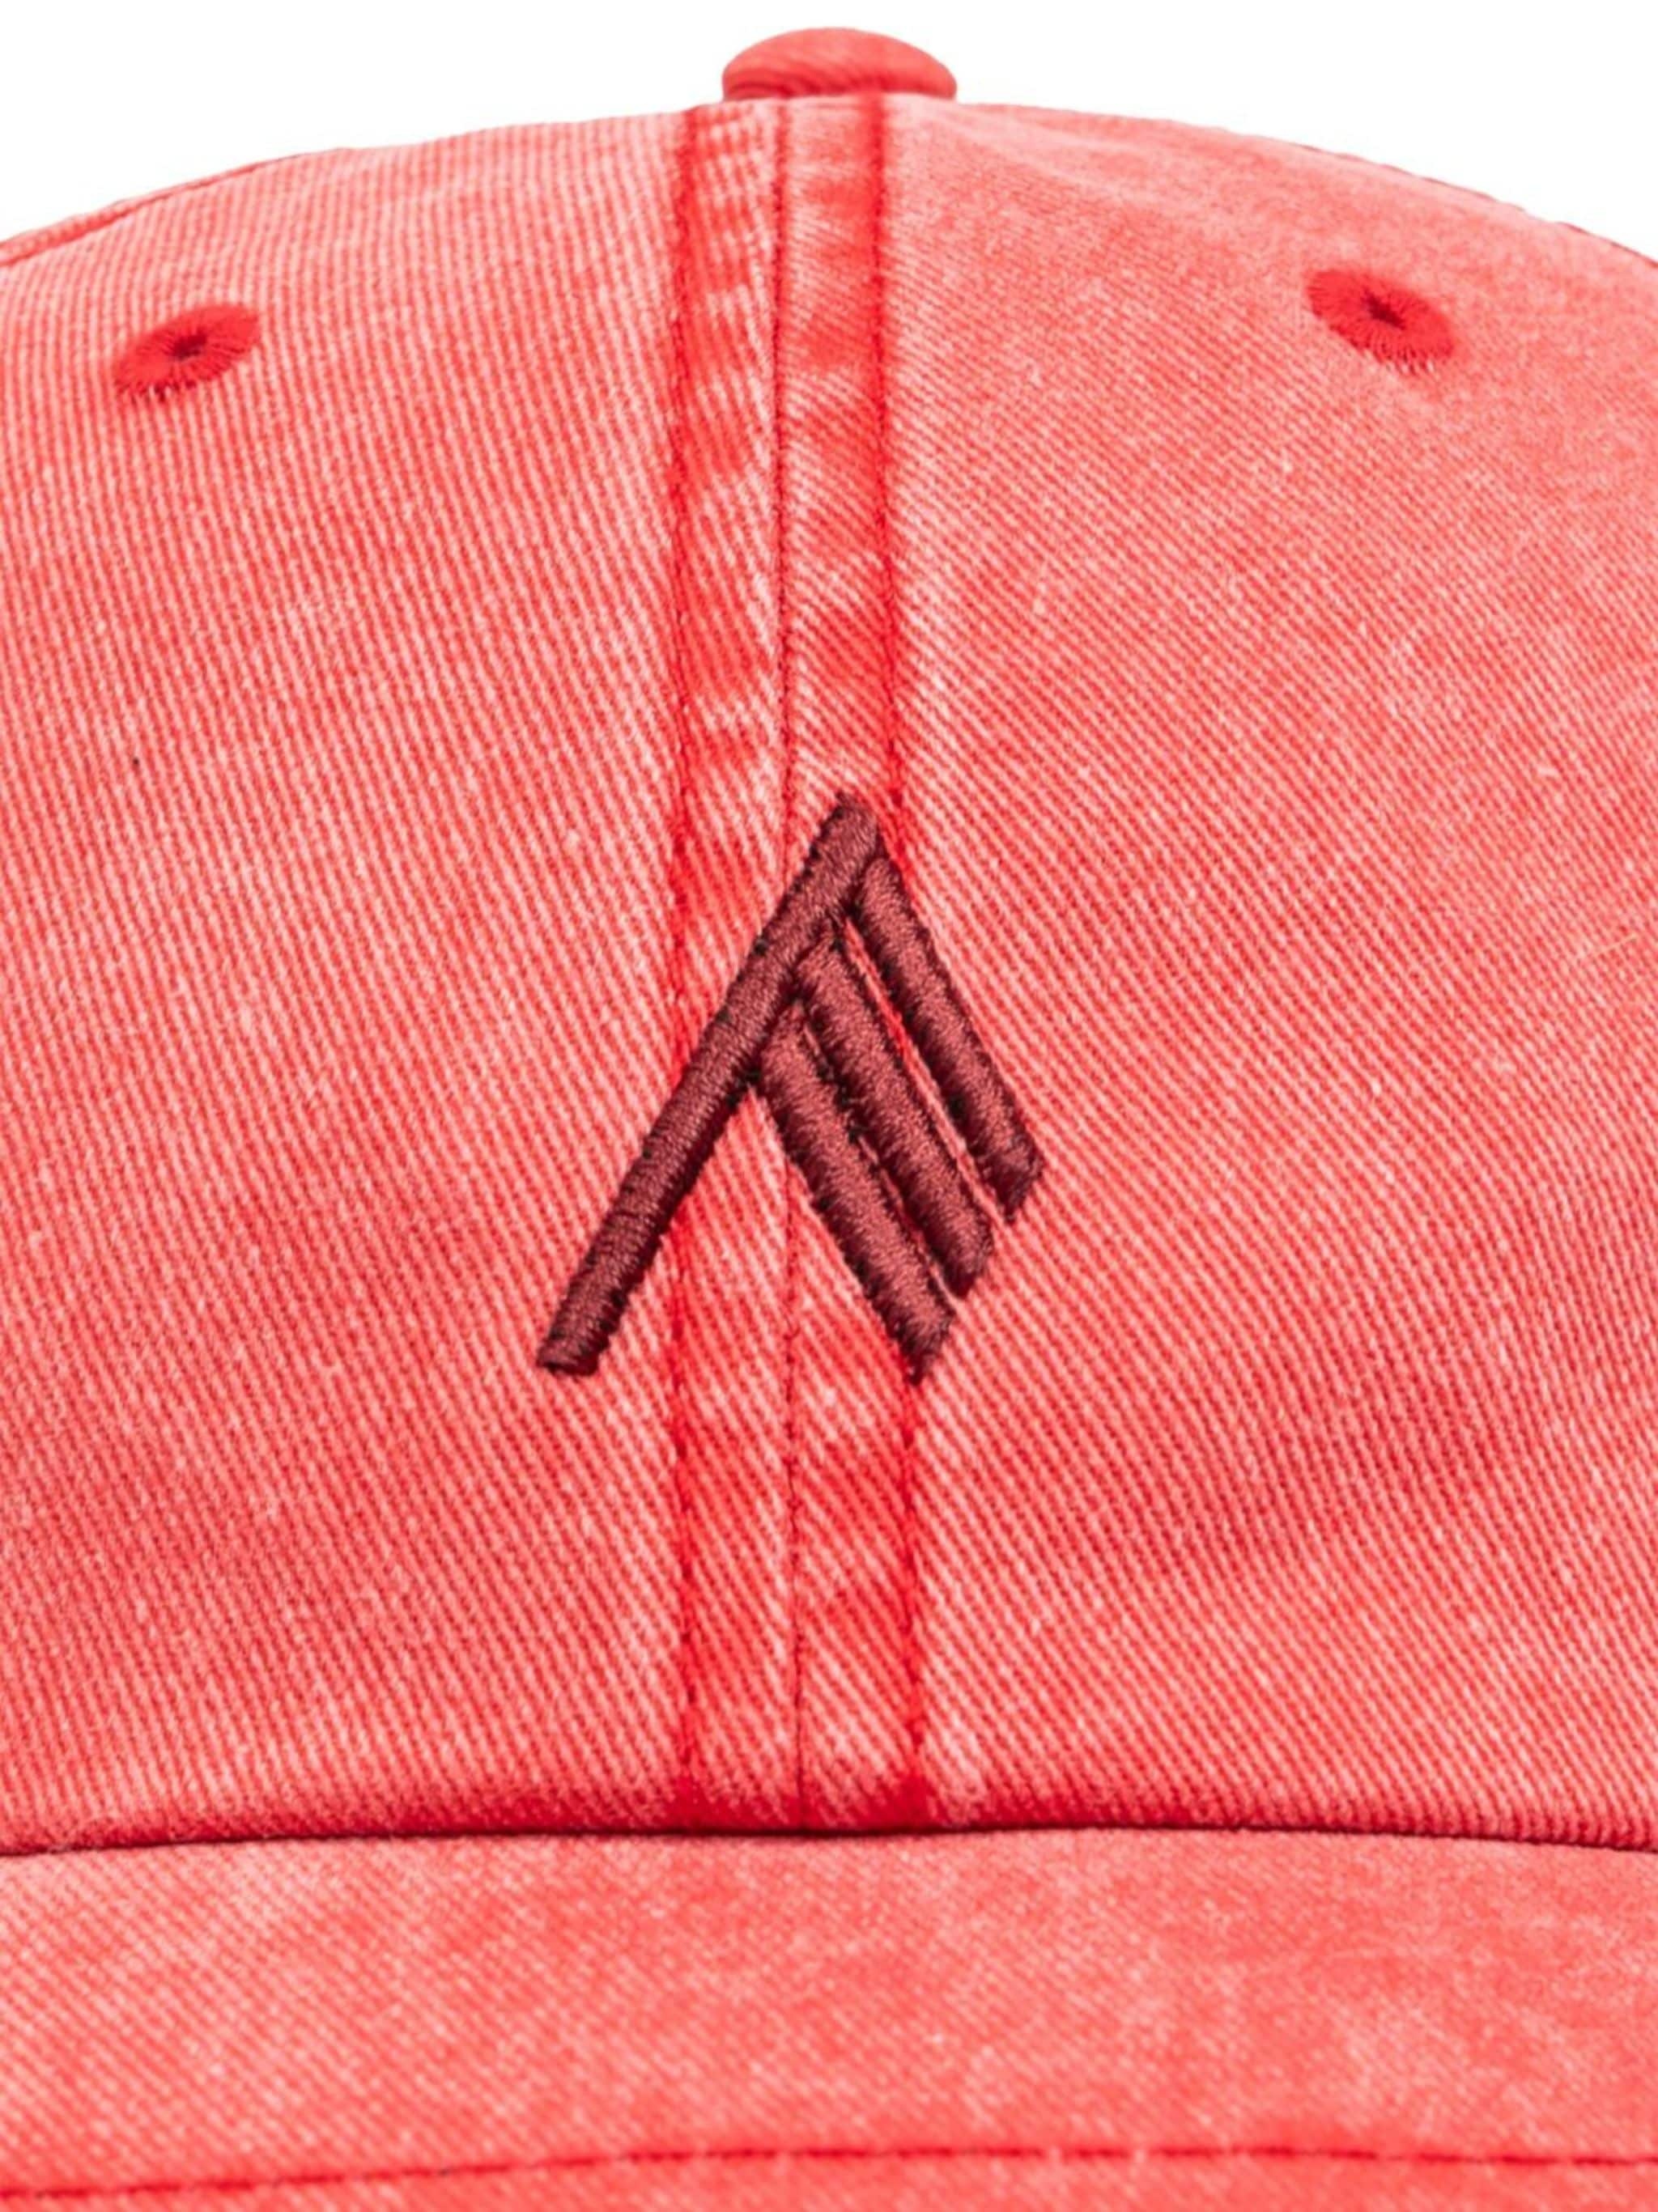 faded logo-embroidered cotton cap - 3